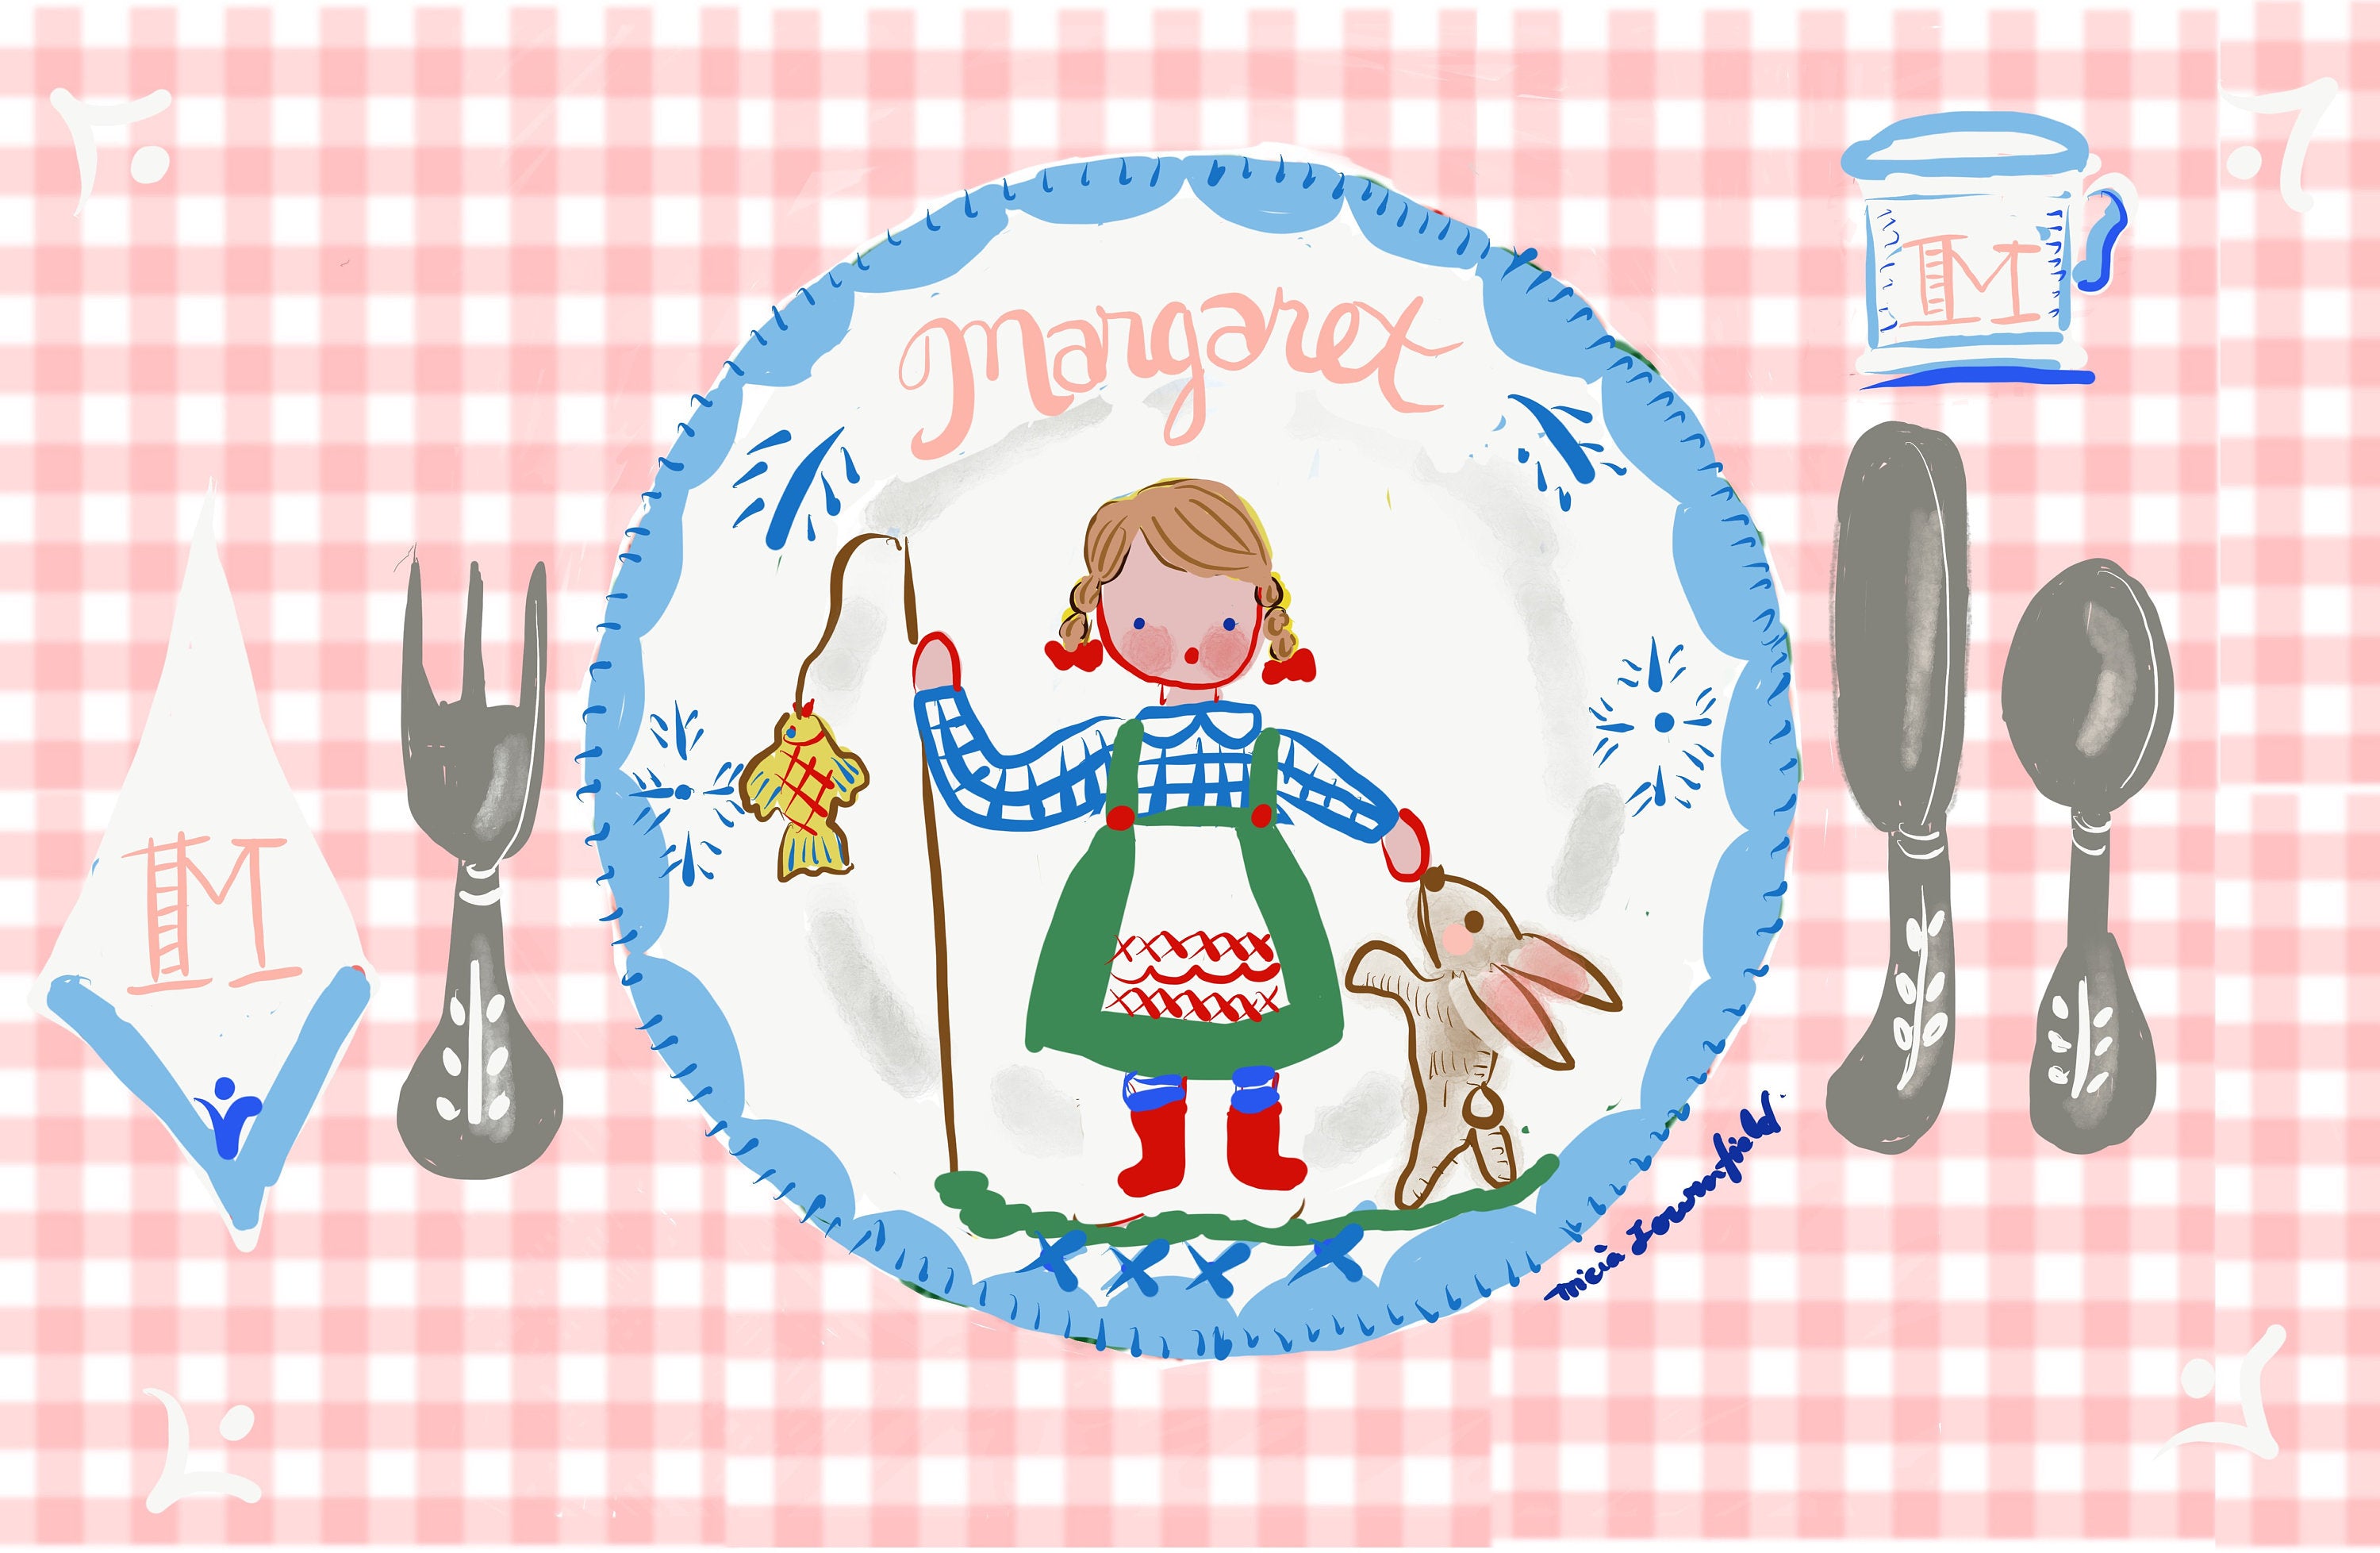 Laminated Placemat - Pink Fisherman Girl and Bunny - Tricia Lowenfield Design